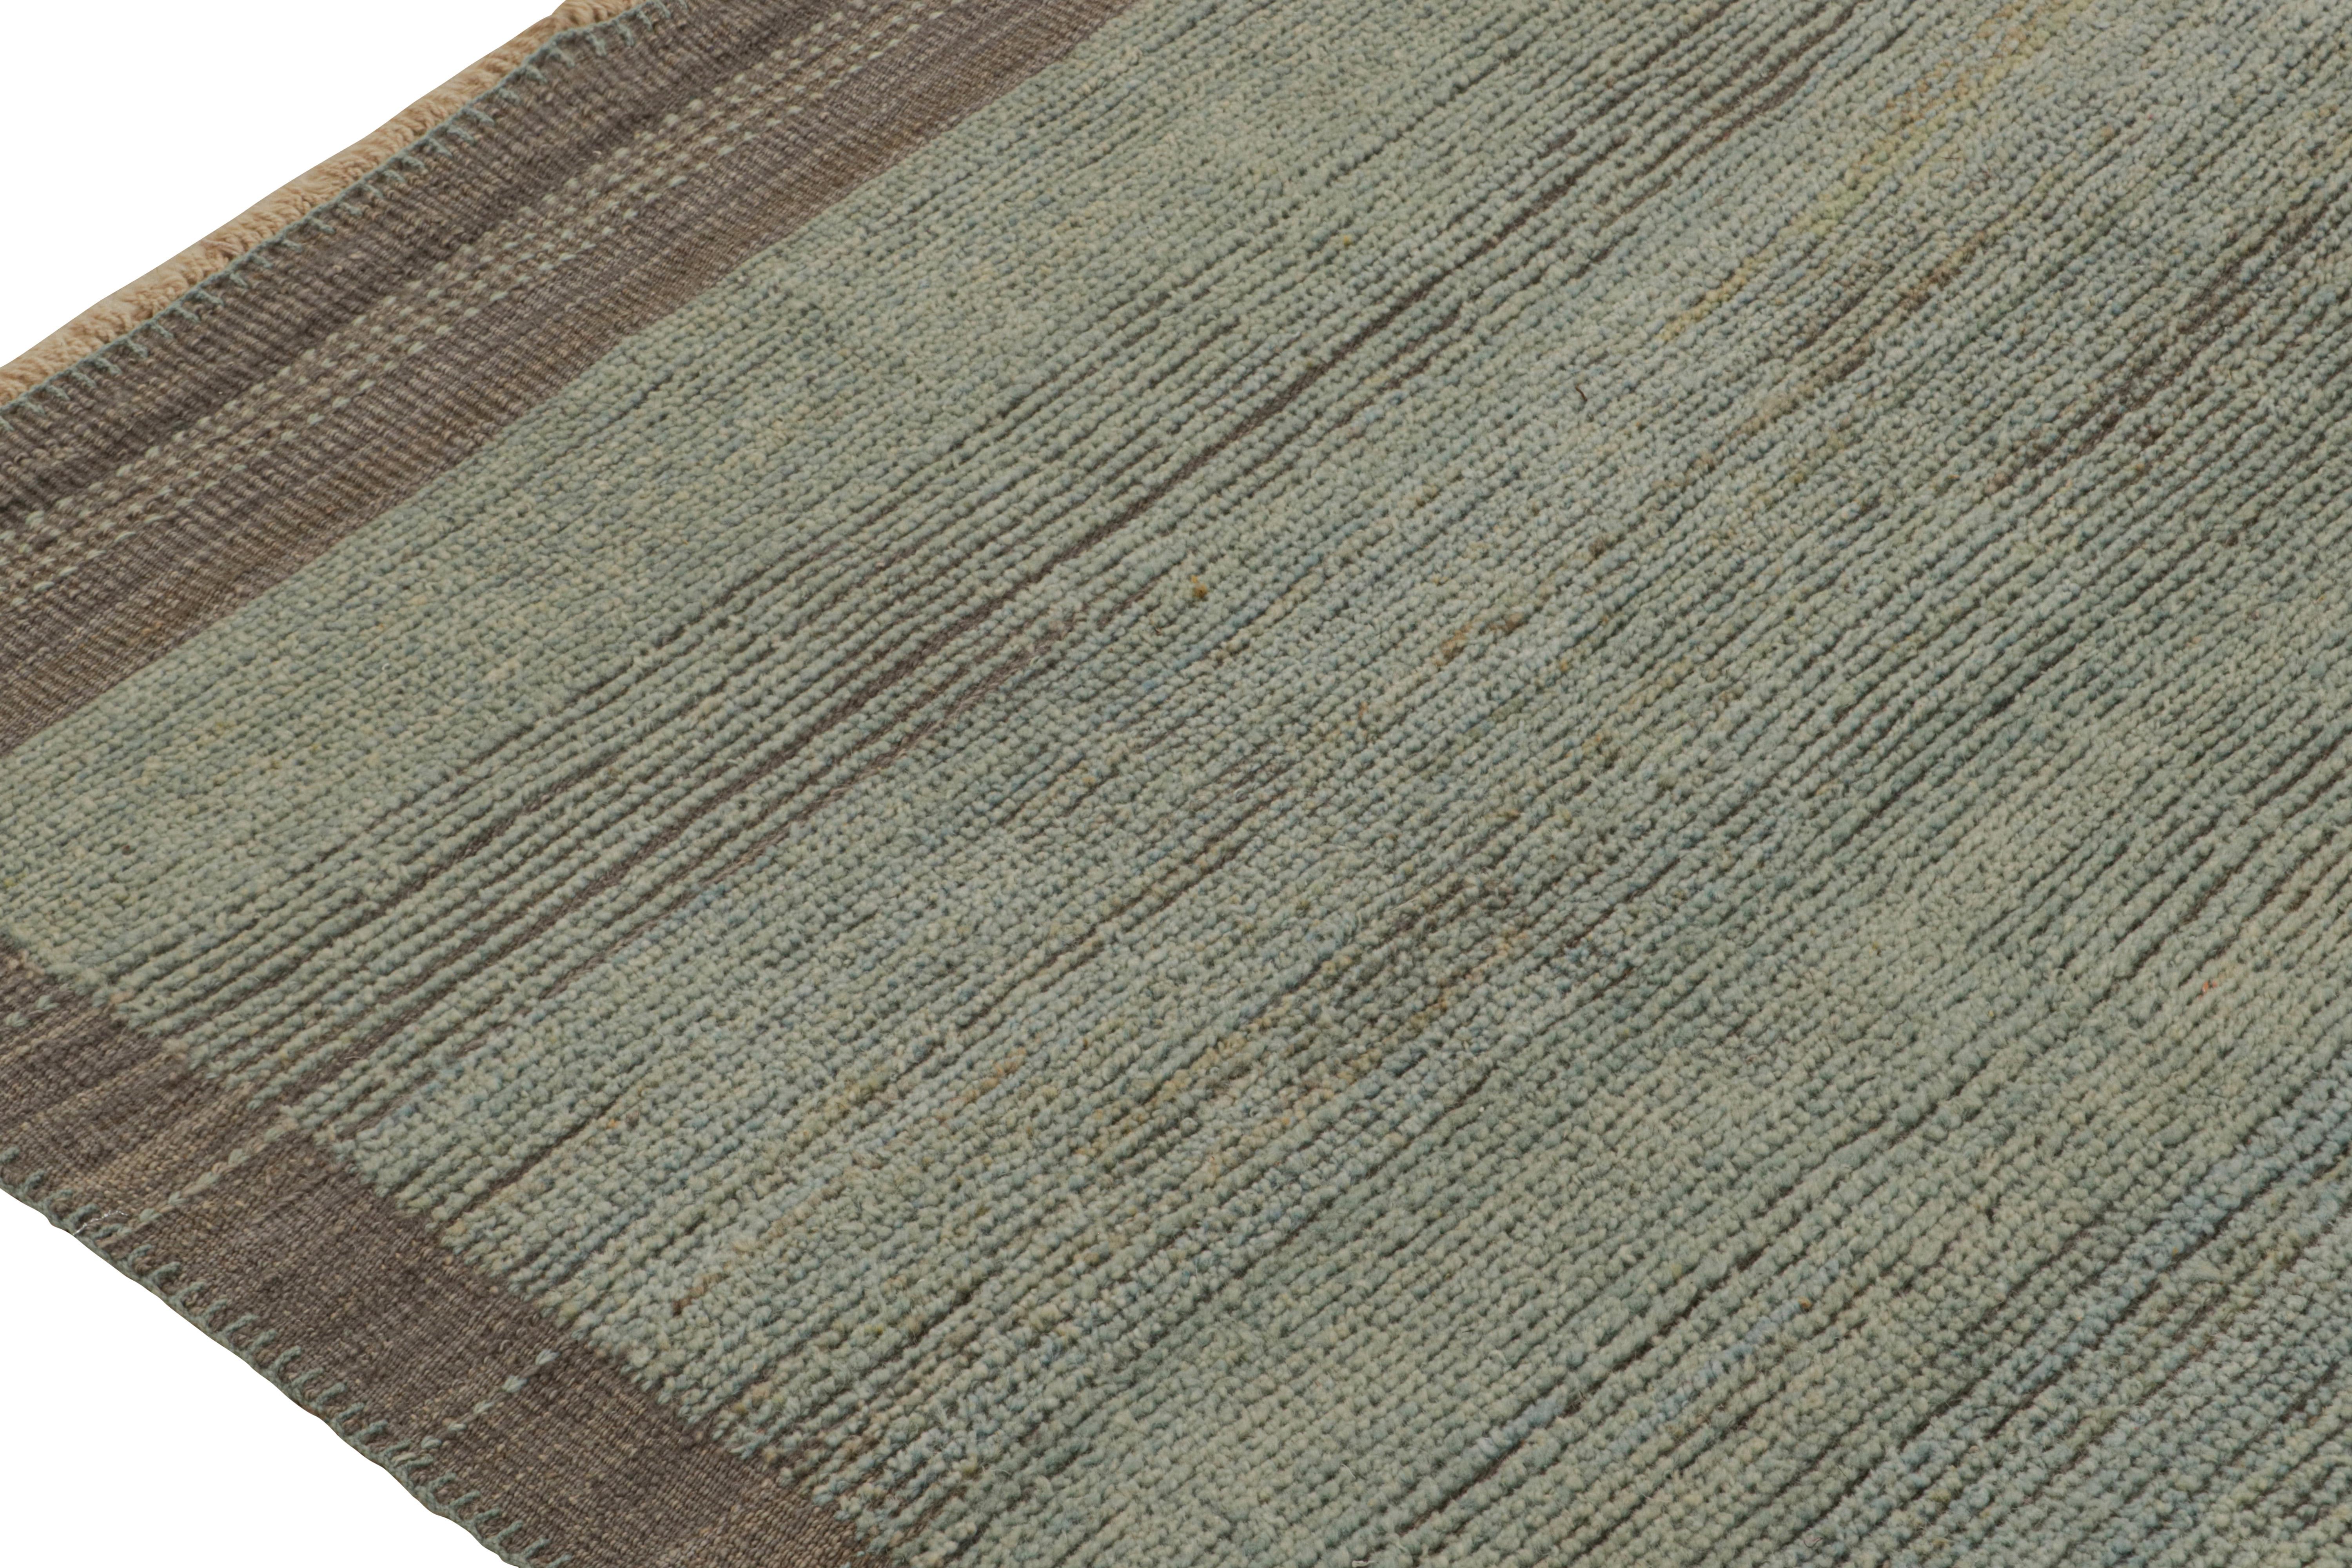 Rug & Kilim’s Modern Rug in Blue and Green Striae with Brown Border In New Condition For Sale In Long Island City, NY